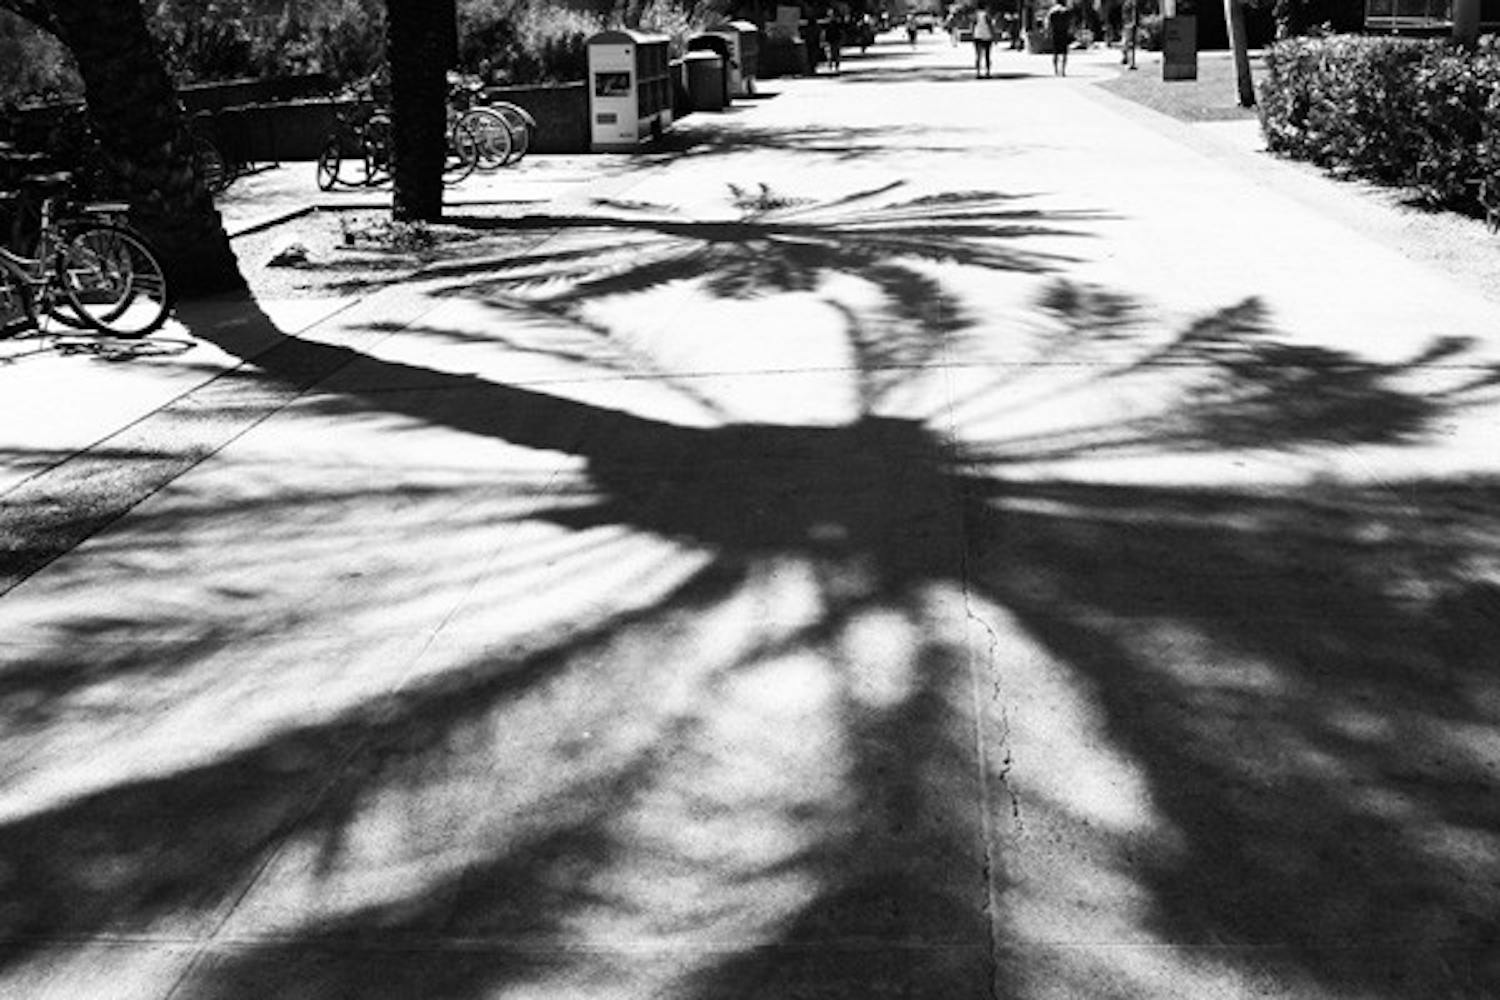 THURSDAY SHADE: Shadows are cast by a few of the many palm trees found towering over Tyler Lawn on Thursday afternoon.  (Photo by Rosie Gochnour)